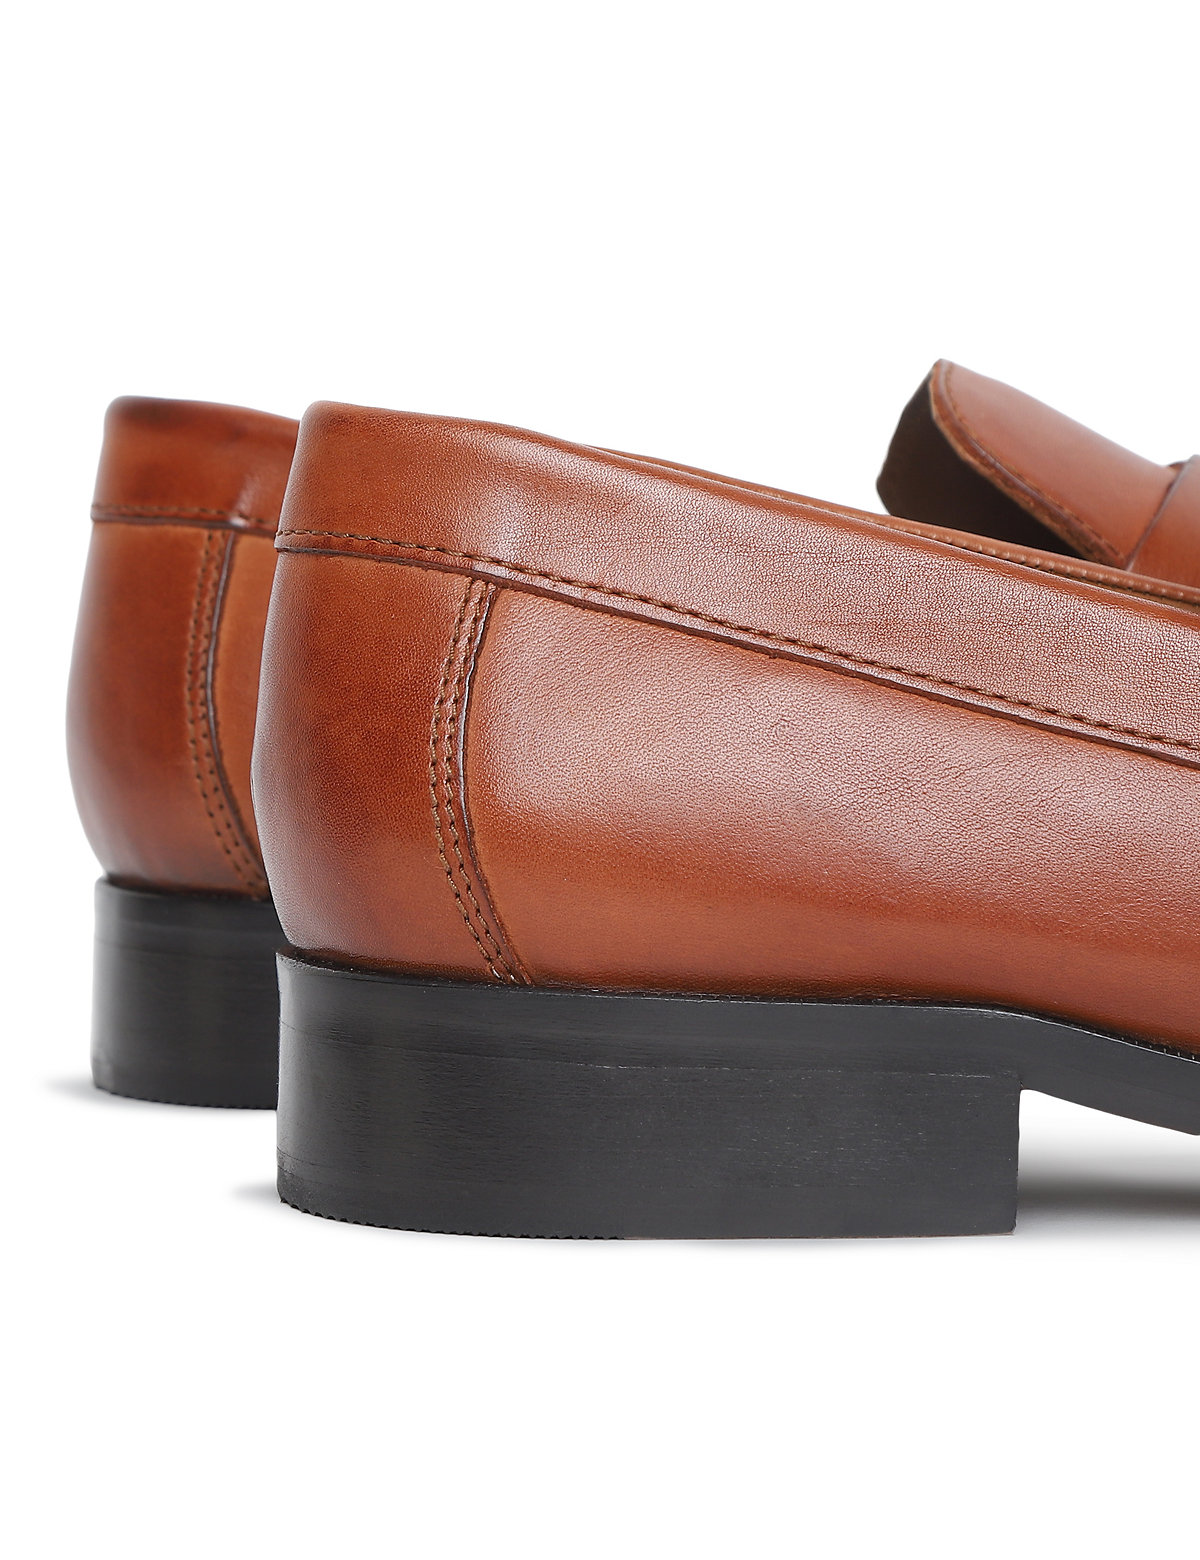 Pure Leather Plain Loafers